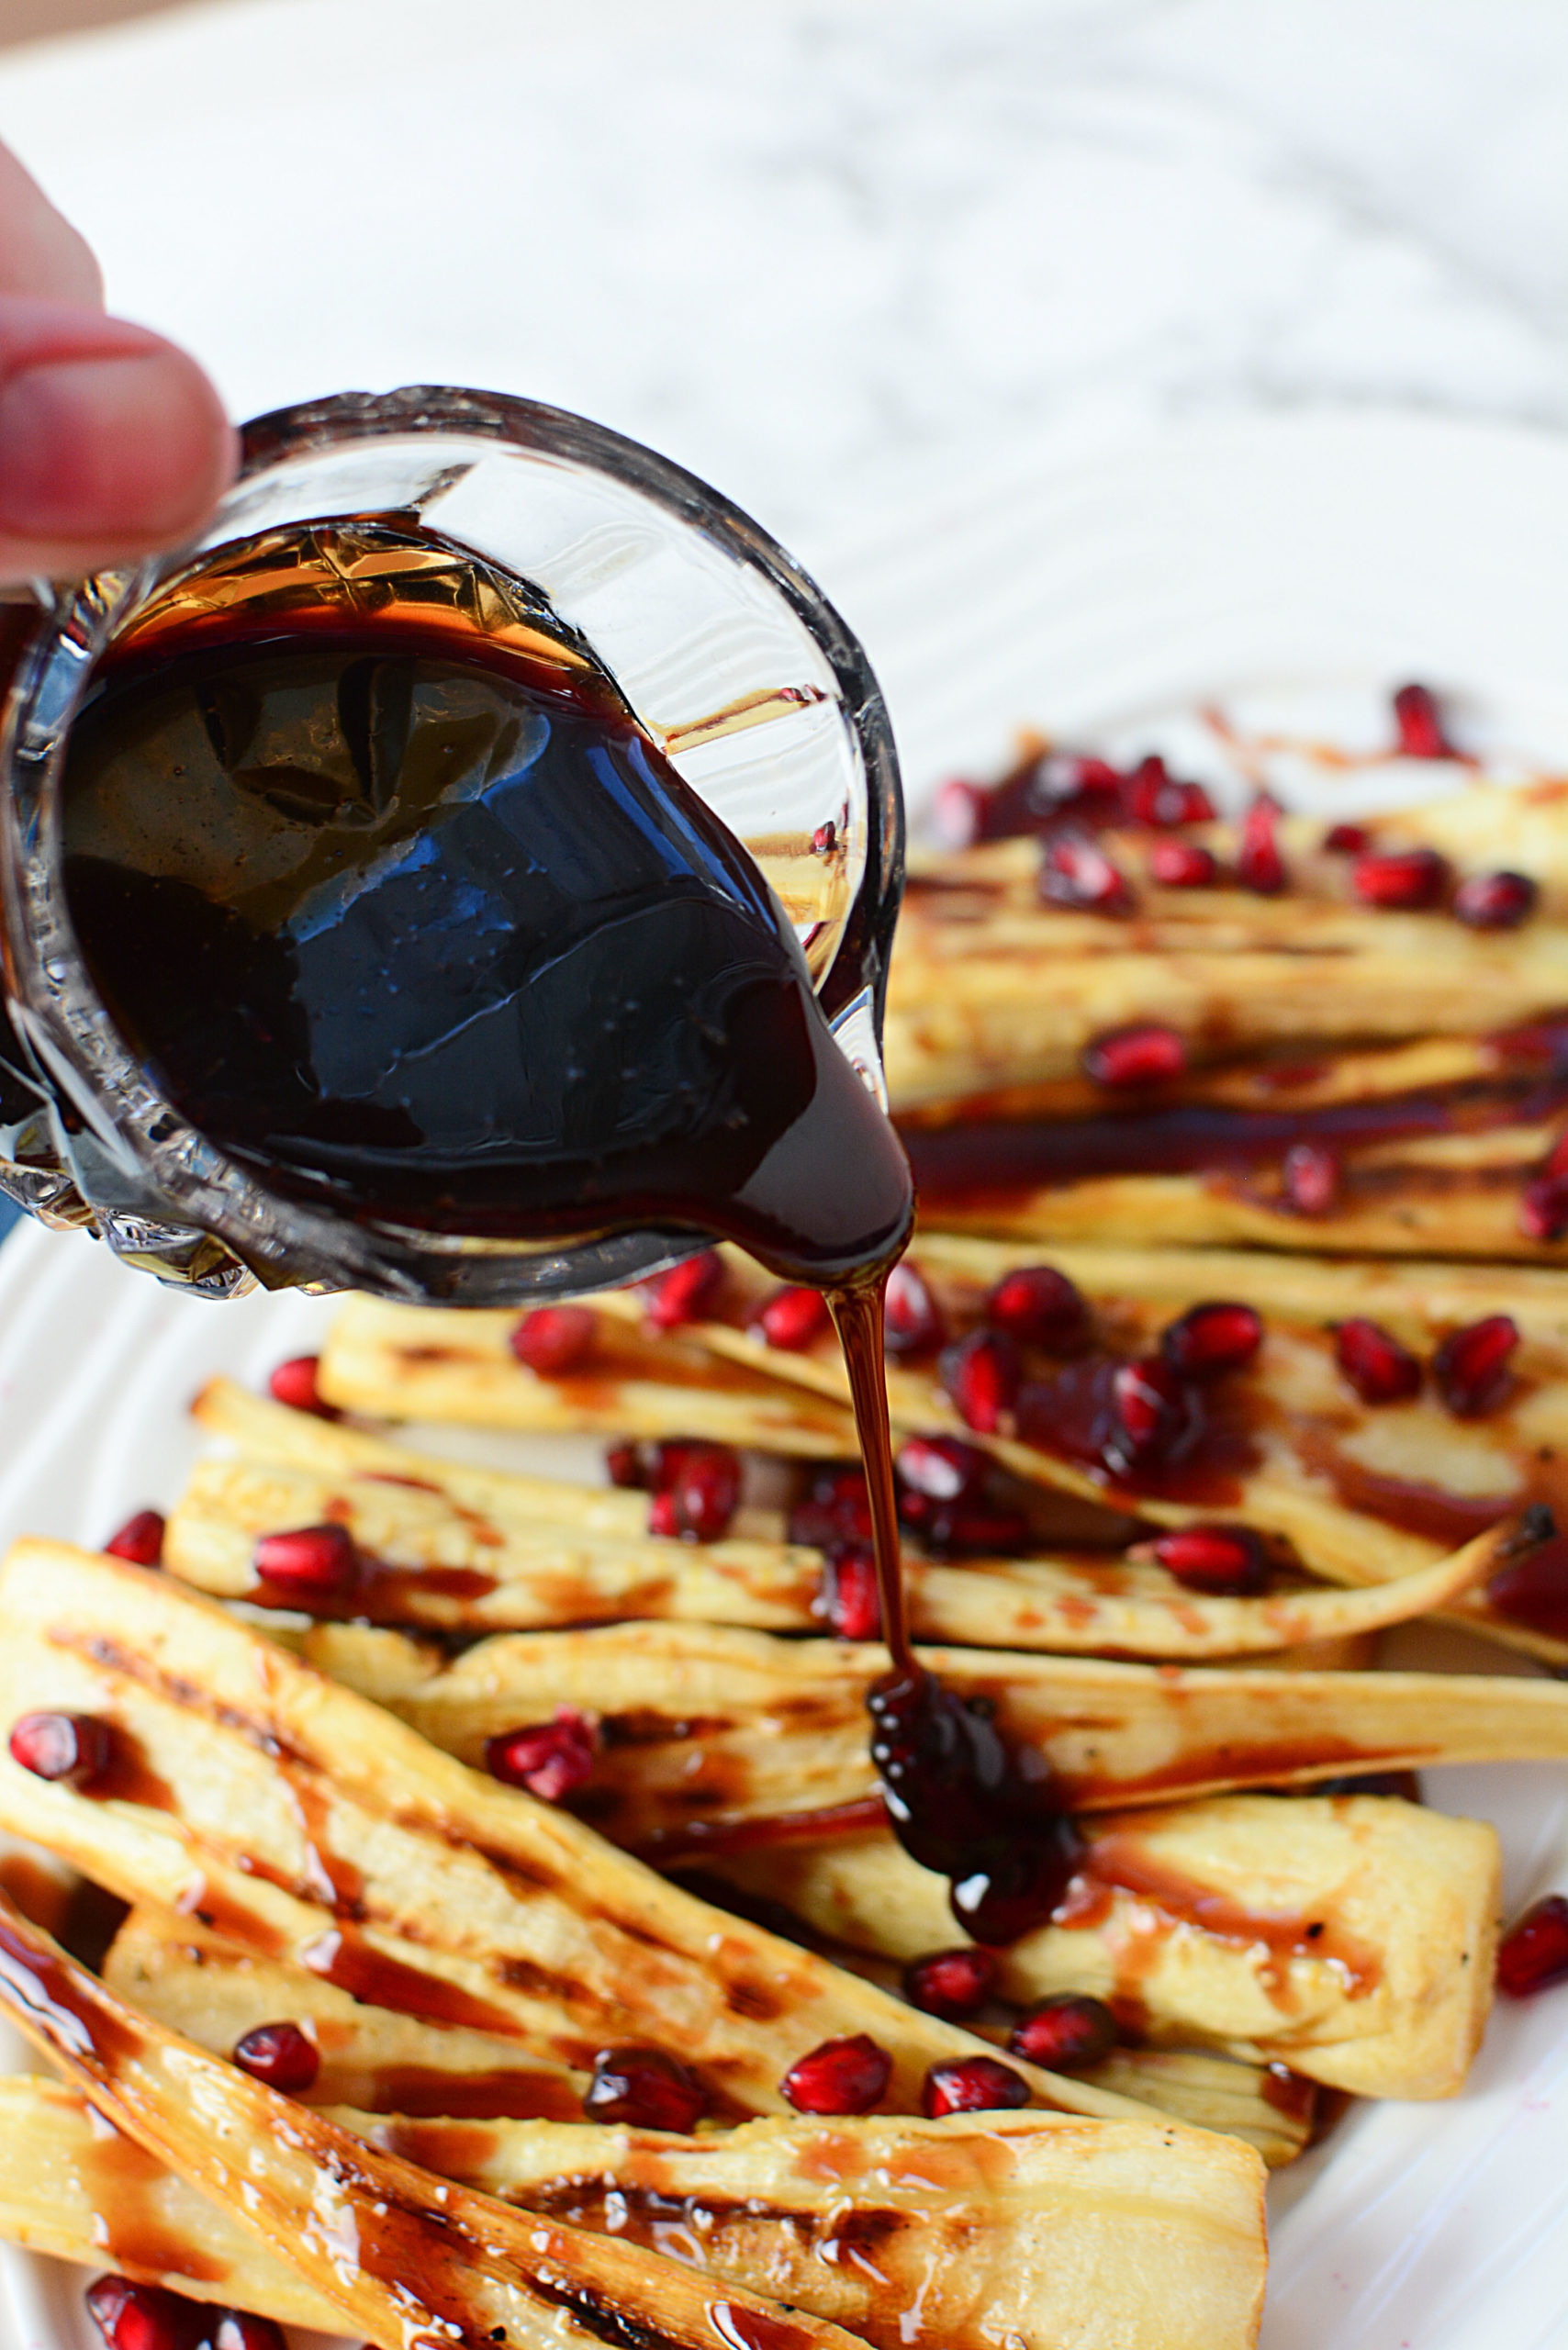 OVEN ROASTED PARSNIPS WITH HONEY POMEGRANATE SAUCE